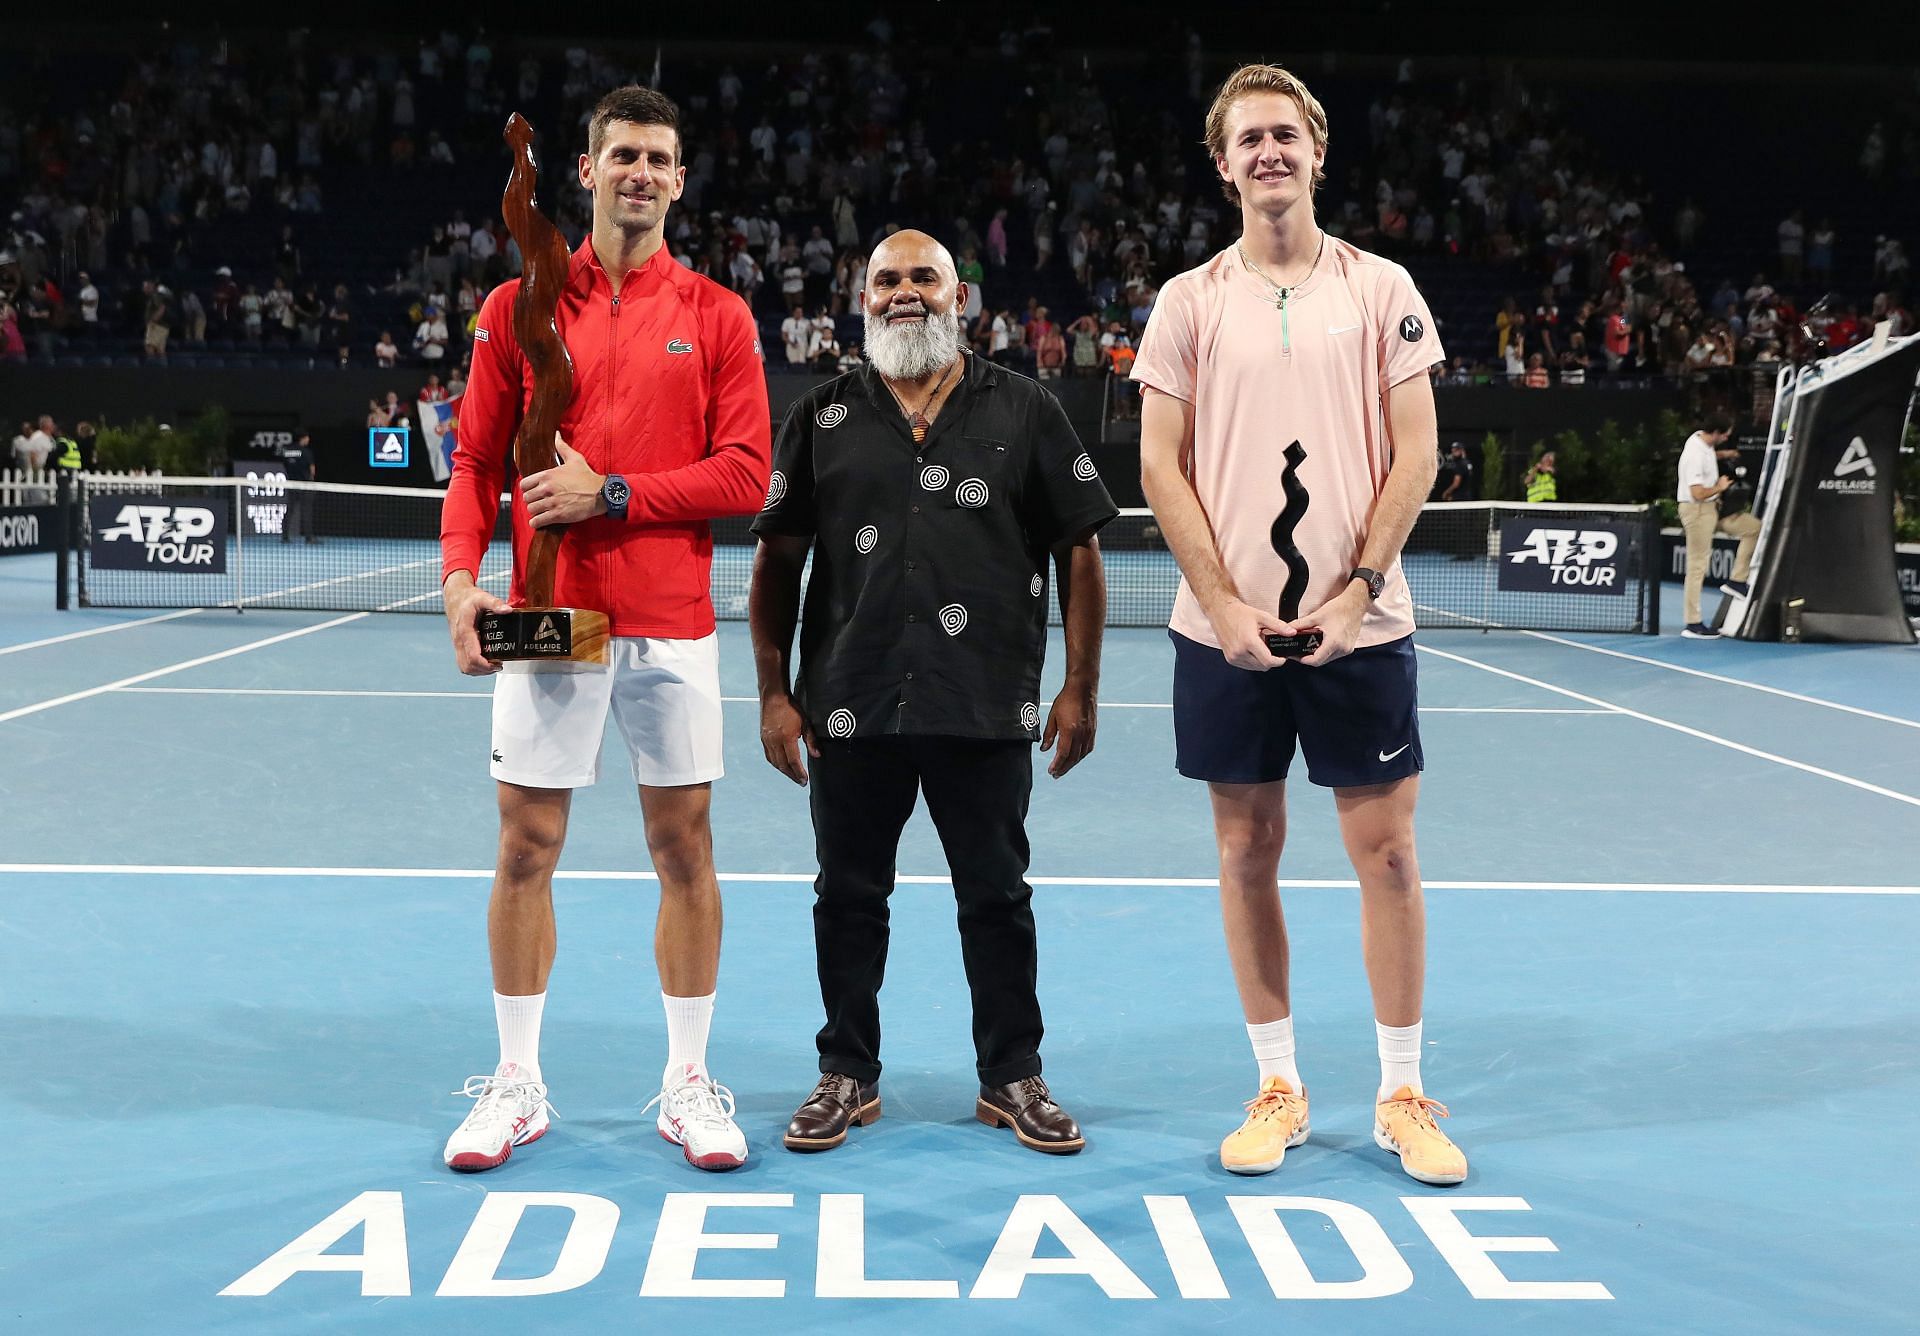 Sebastian Korda marks his admiration for Andre Agassi after spotting  picture of the the former World No. 1 at Australian Open